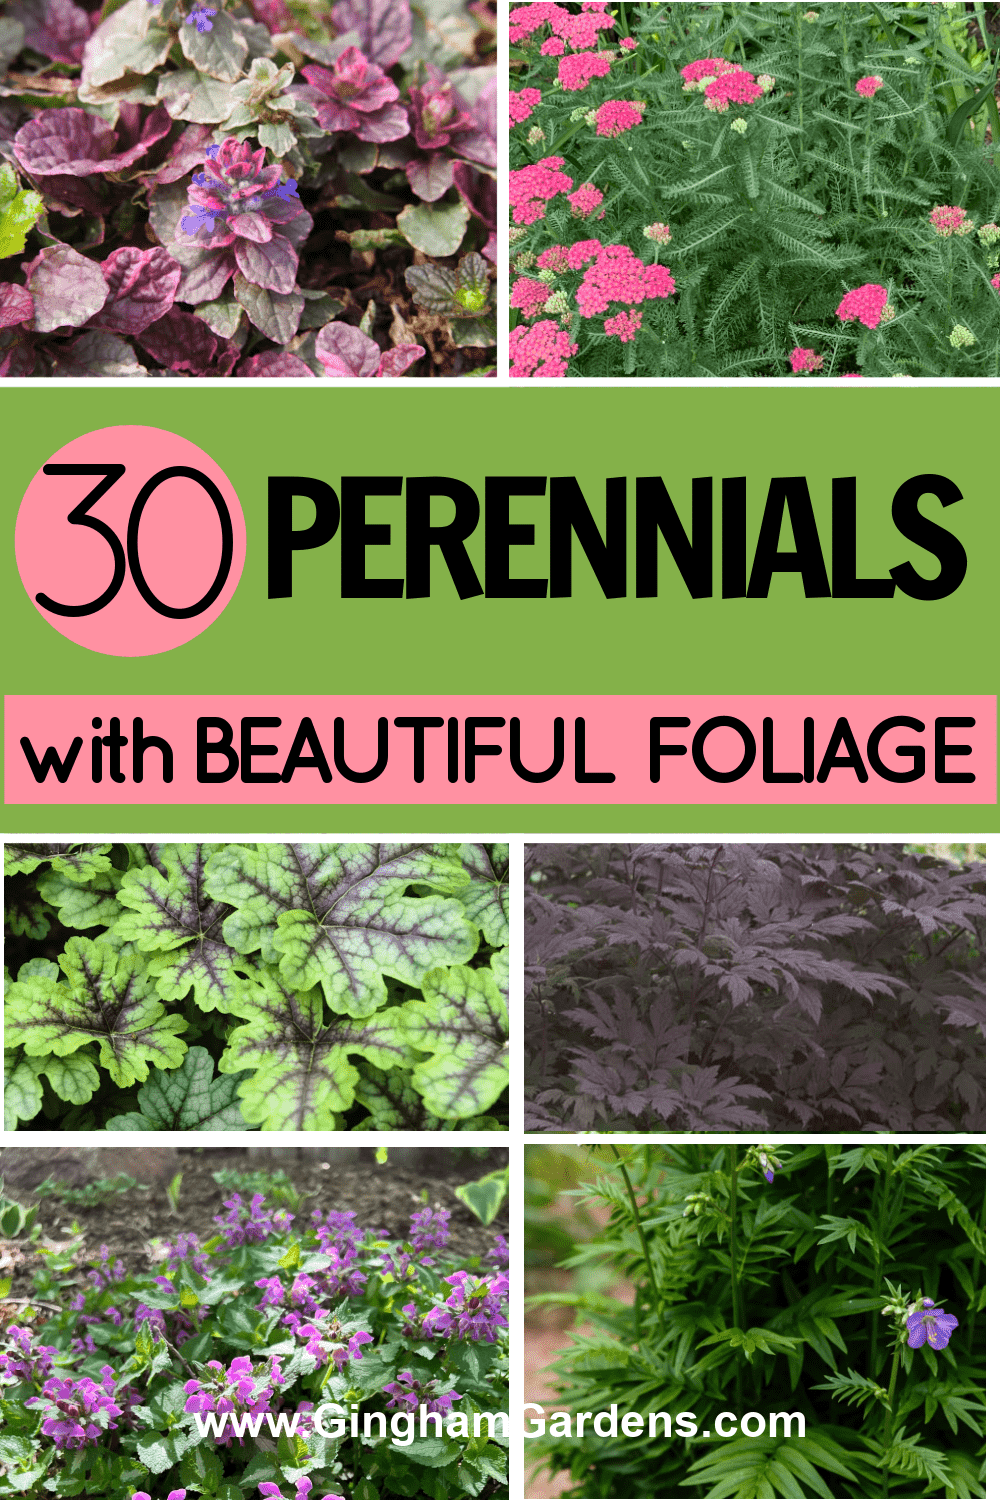 Collage of plants with beautiful foliage with text overlay - 30 Perennials with Beautiful Foliage